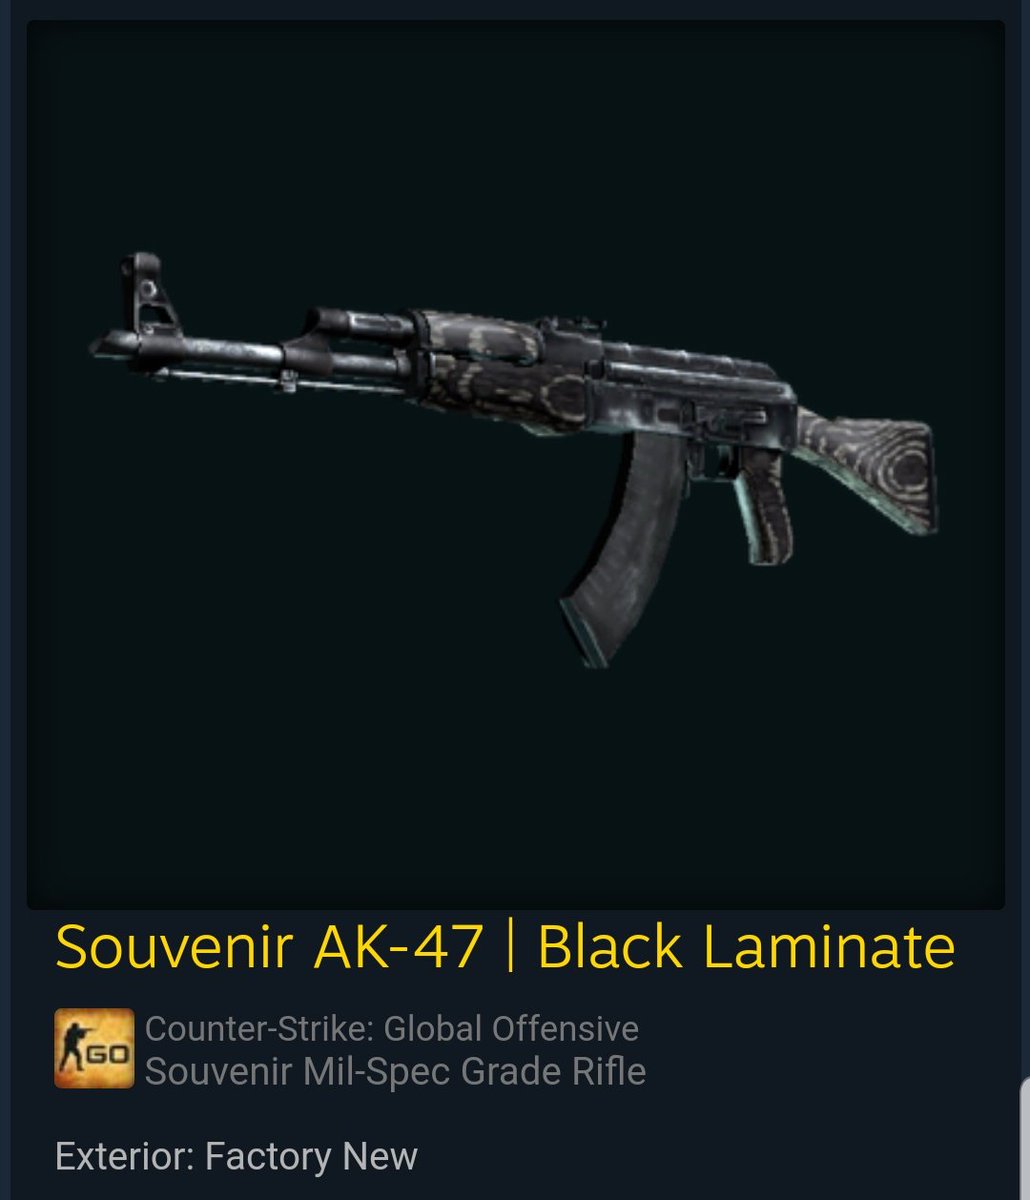 ohnePixel on Twitter: "Souvenir AK-47 | Black Laminate *20 after it started dropping* Highest Sale Price = $660 💸 Souvenir / Non = ~30% higher $ Current = 2,346 FNs = 22 https://t.co/arVsyQjflp" / Twitter